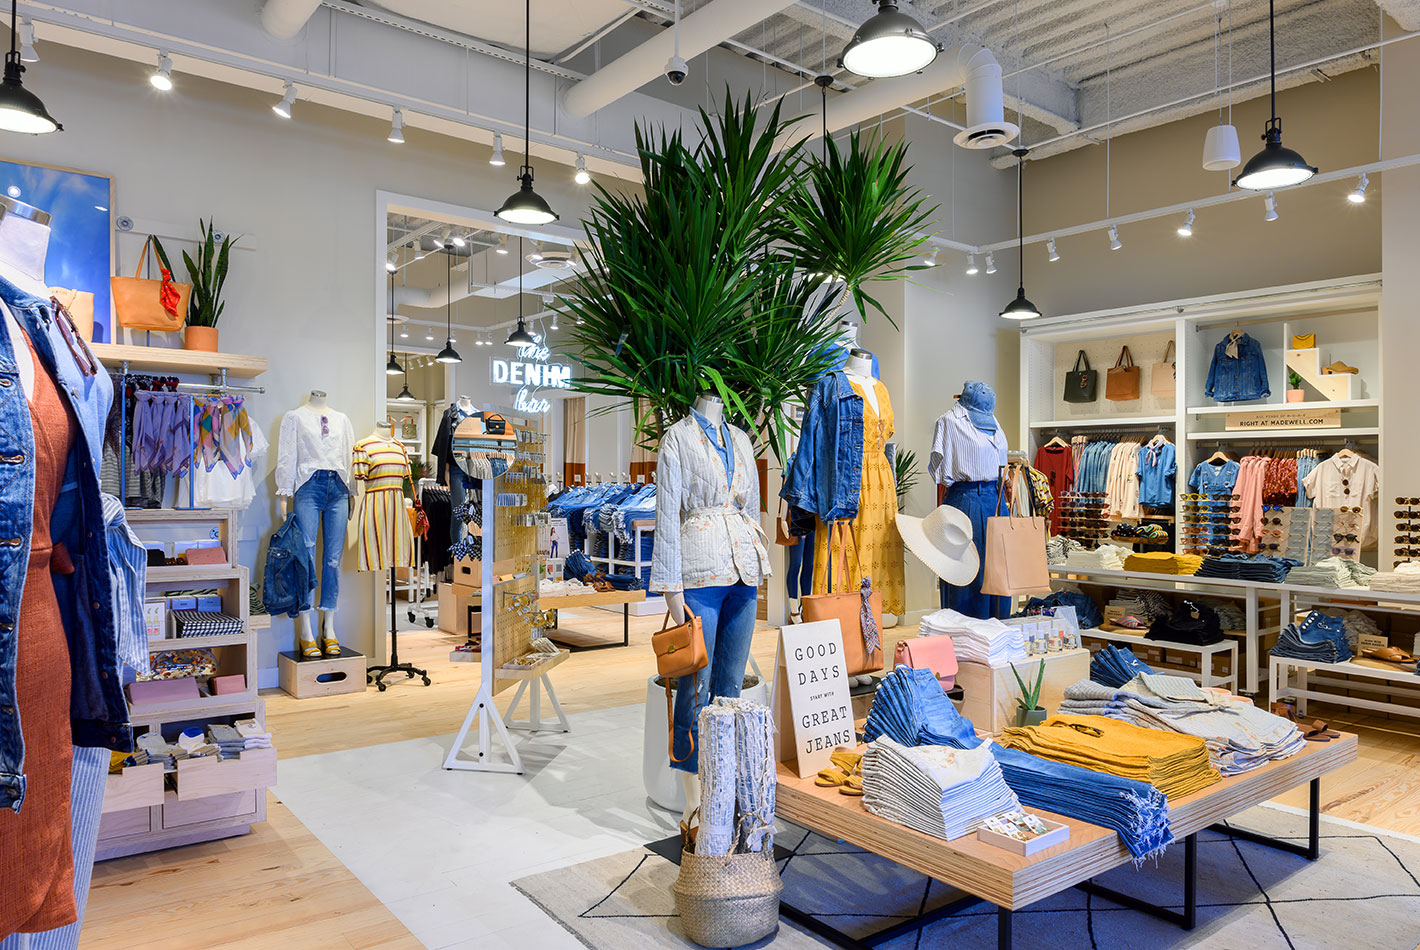 The women's department at Madewell features a collection of indigo-hued clothing and accessories